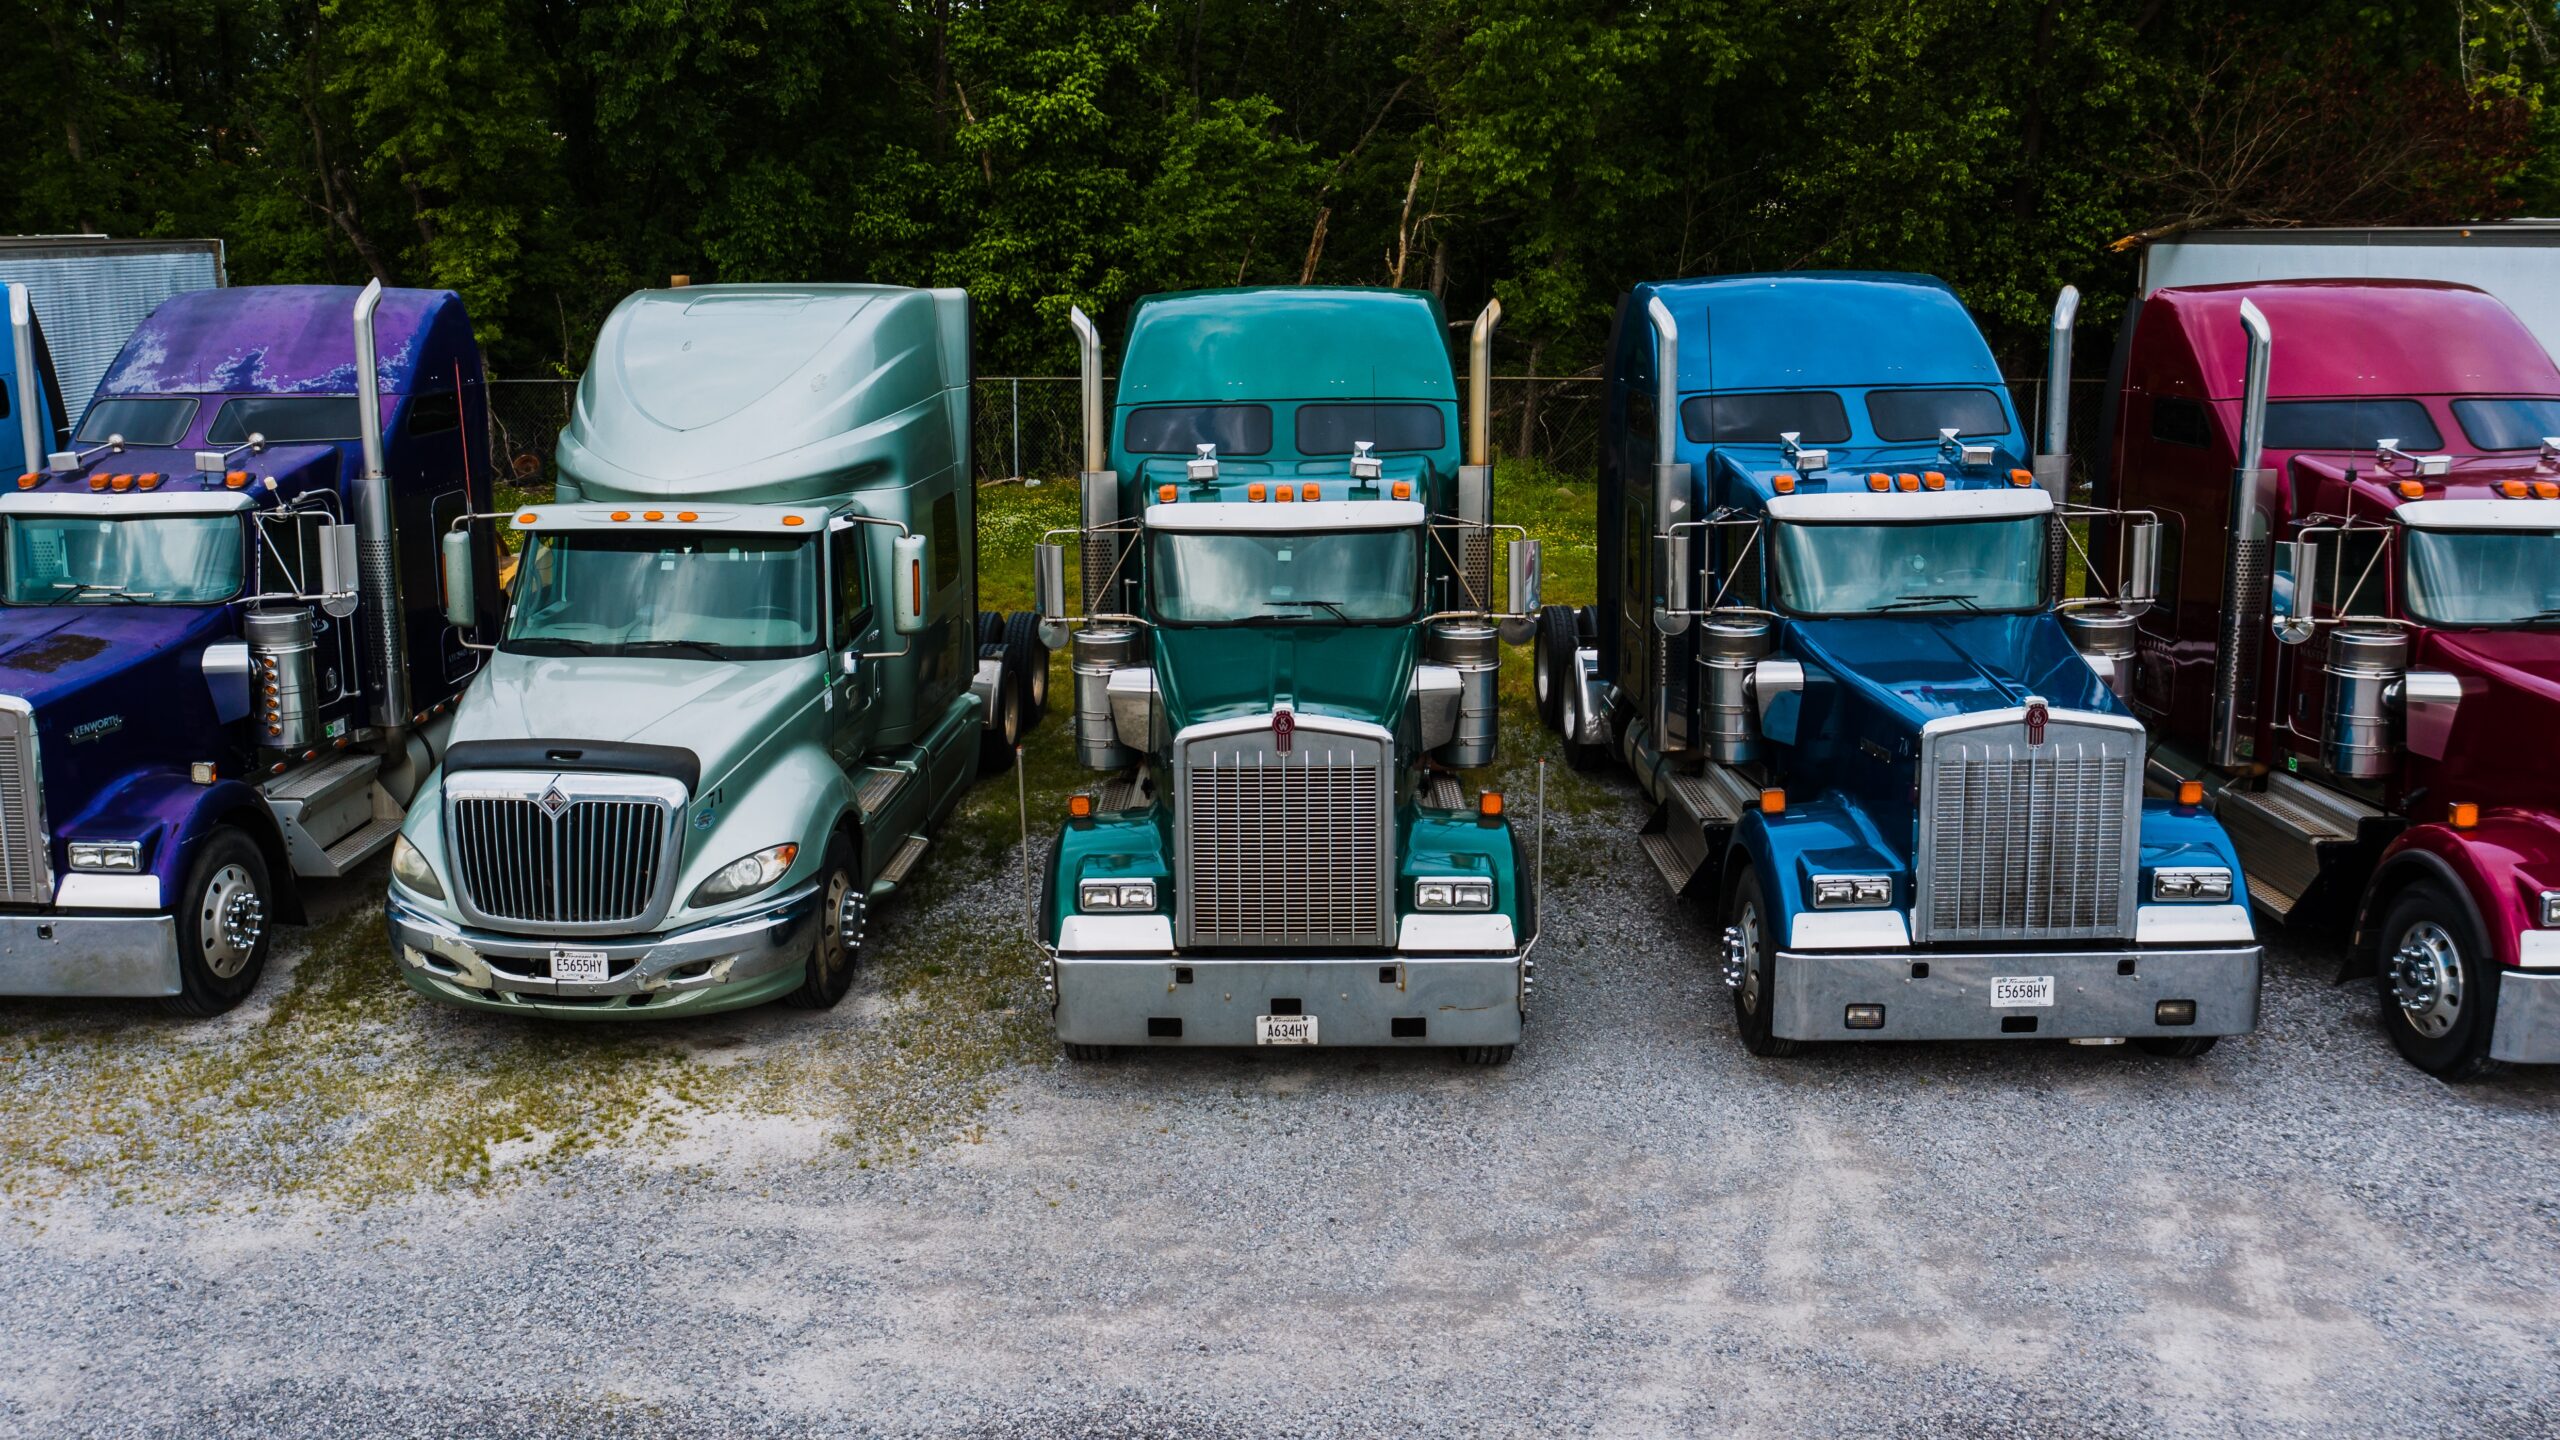 An bird's-eye view of a row of 5 primary-colored semi-trailer semi-trucks